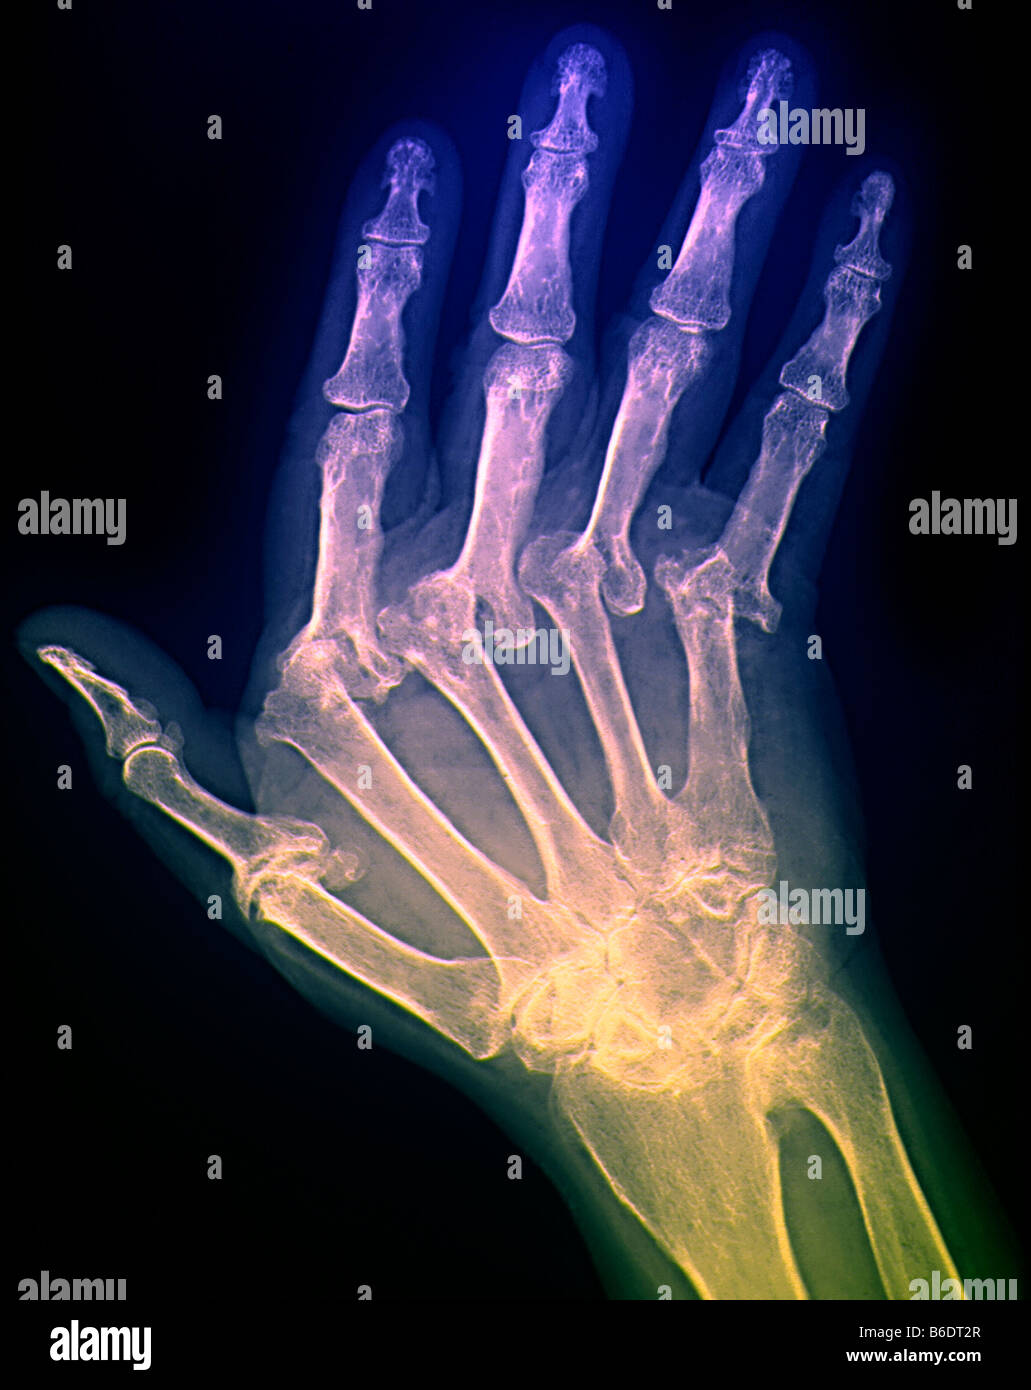 Arthritic hand. X-ray of the hand of a patient with severe rheumatoid arthritis in all of their fingers. The thumb is at left. Stock Photo